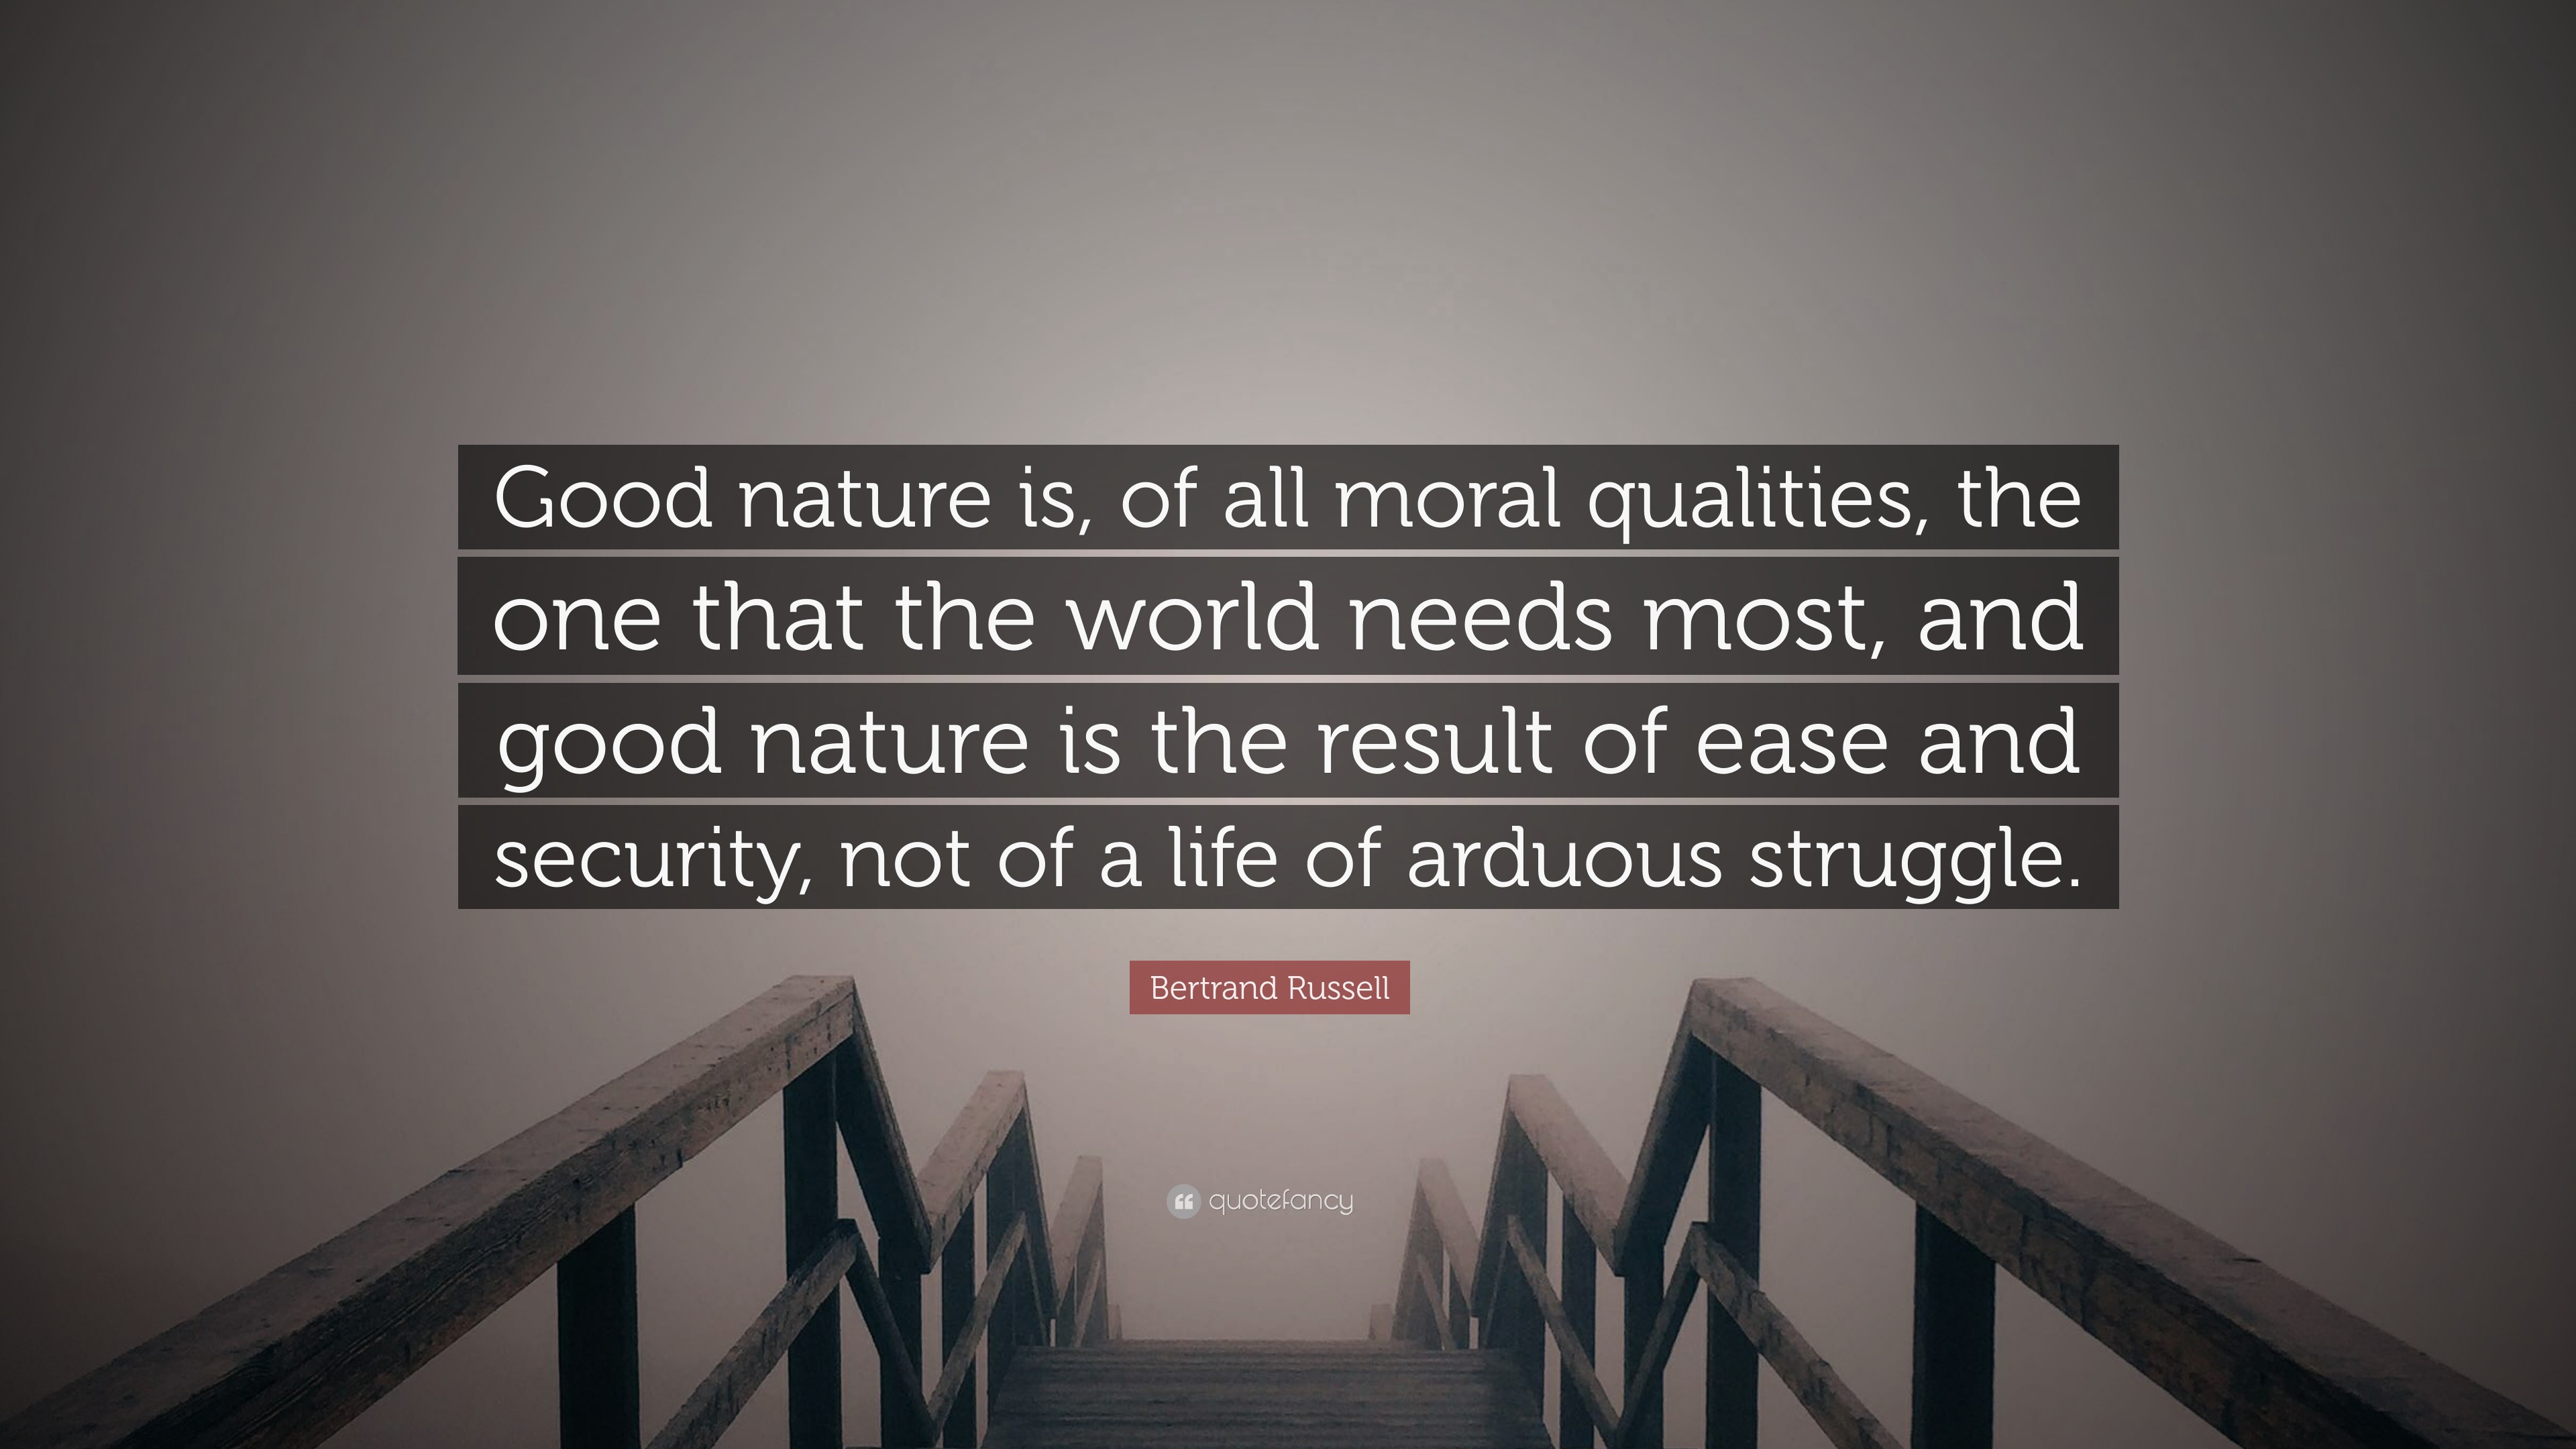 Bertrand Russell Quote: “Good nature is, of all moral qualities, the one that the world needs most, and good nature is the result of and sec...”